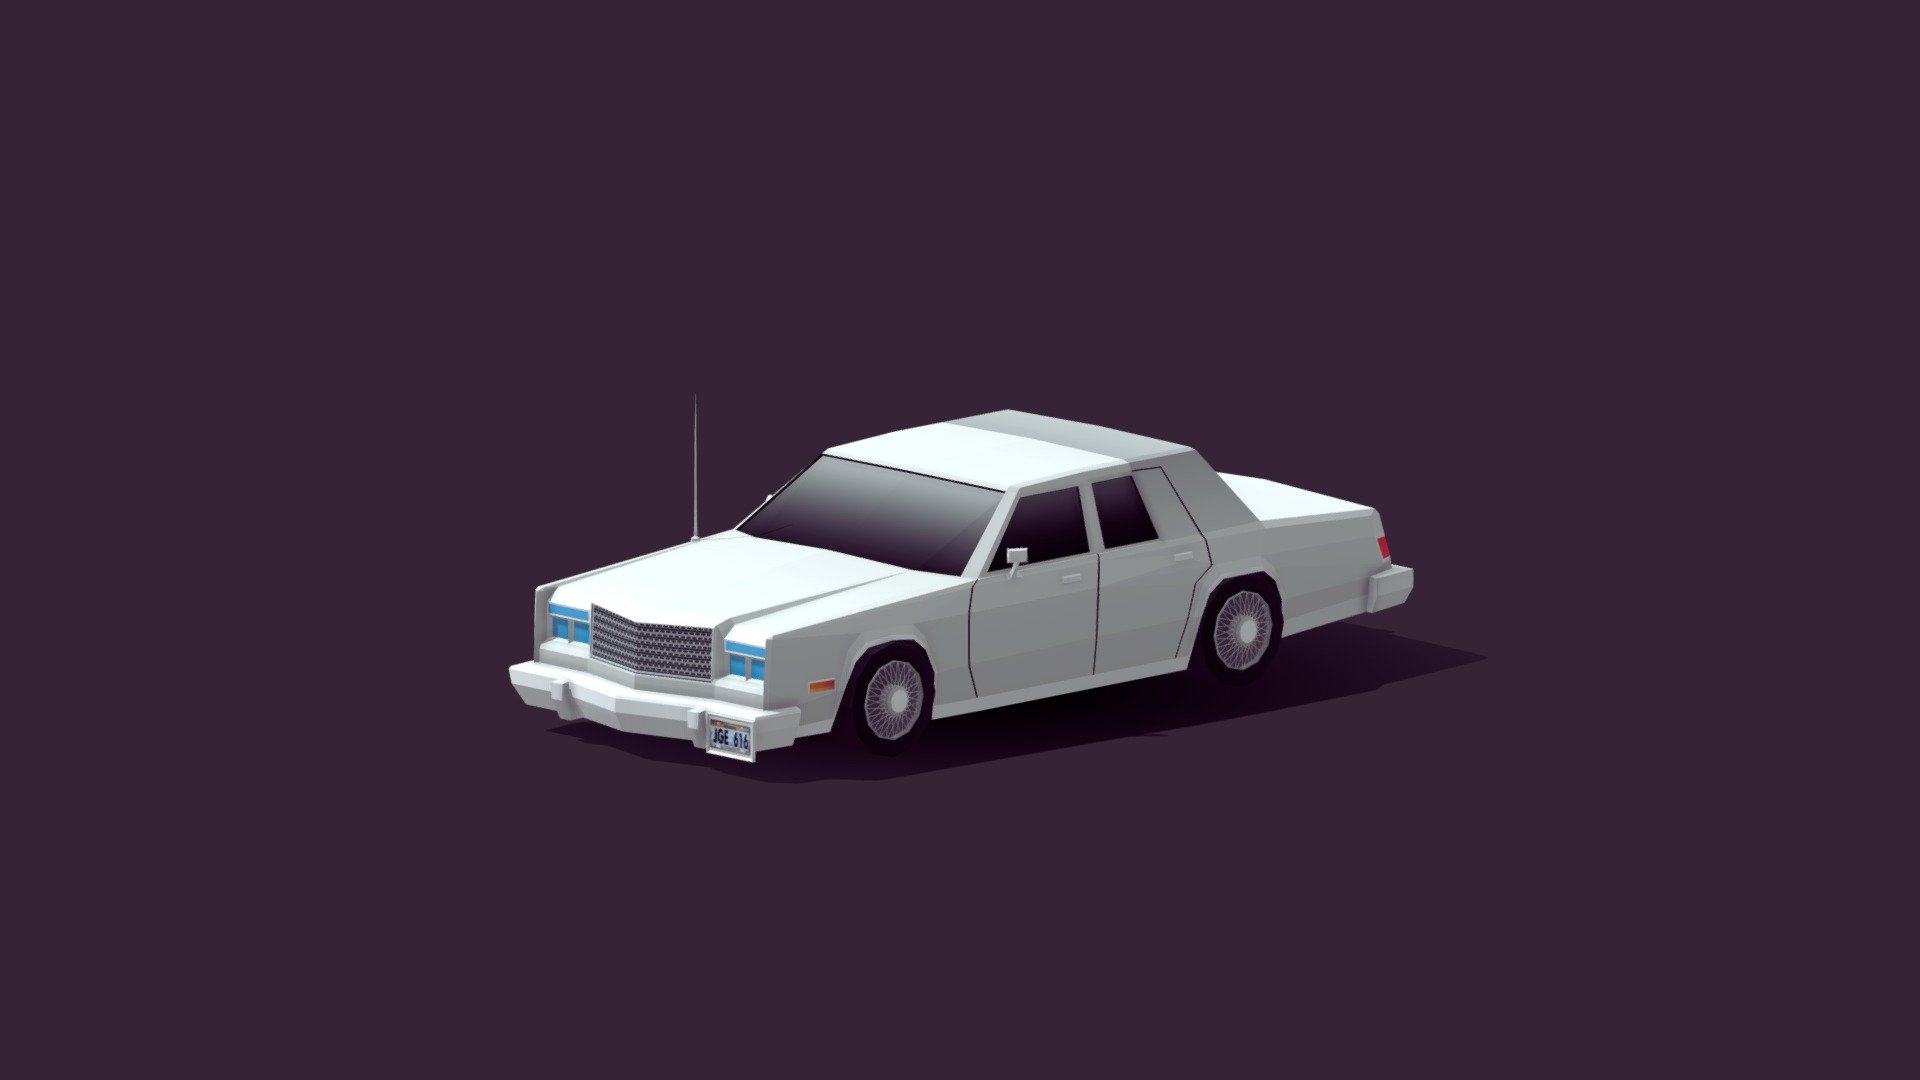 Cartoon Low Poly Chrysler 1980 Car

Created on Cinema 4d R20

UVW Textured with color Palette

Game Ready,AR/ VR Ready
 - Cartoon Low Poly Chrysler New Yorker 1980 - Download Free 3D model by antonmoek 3d model